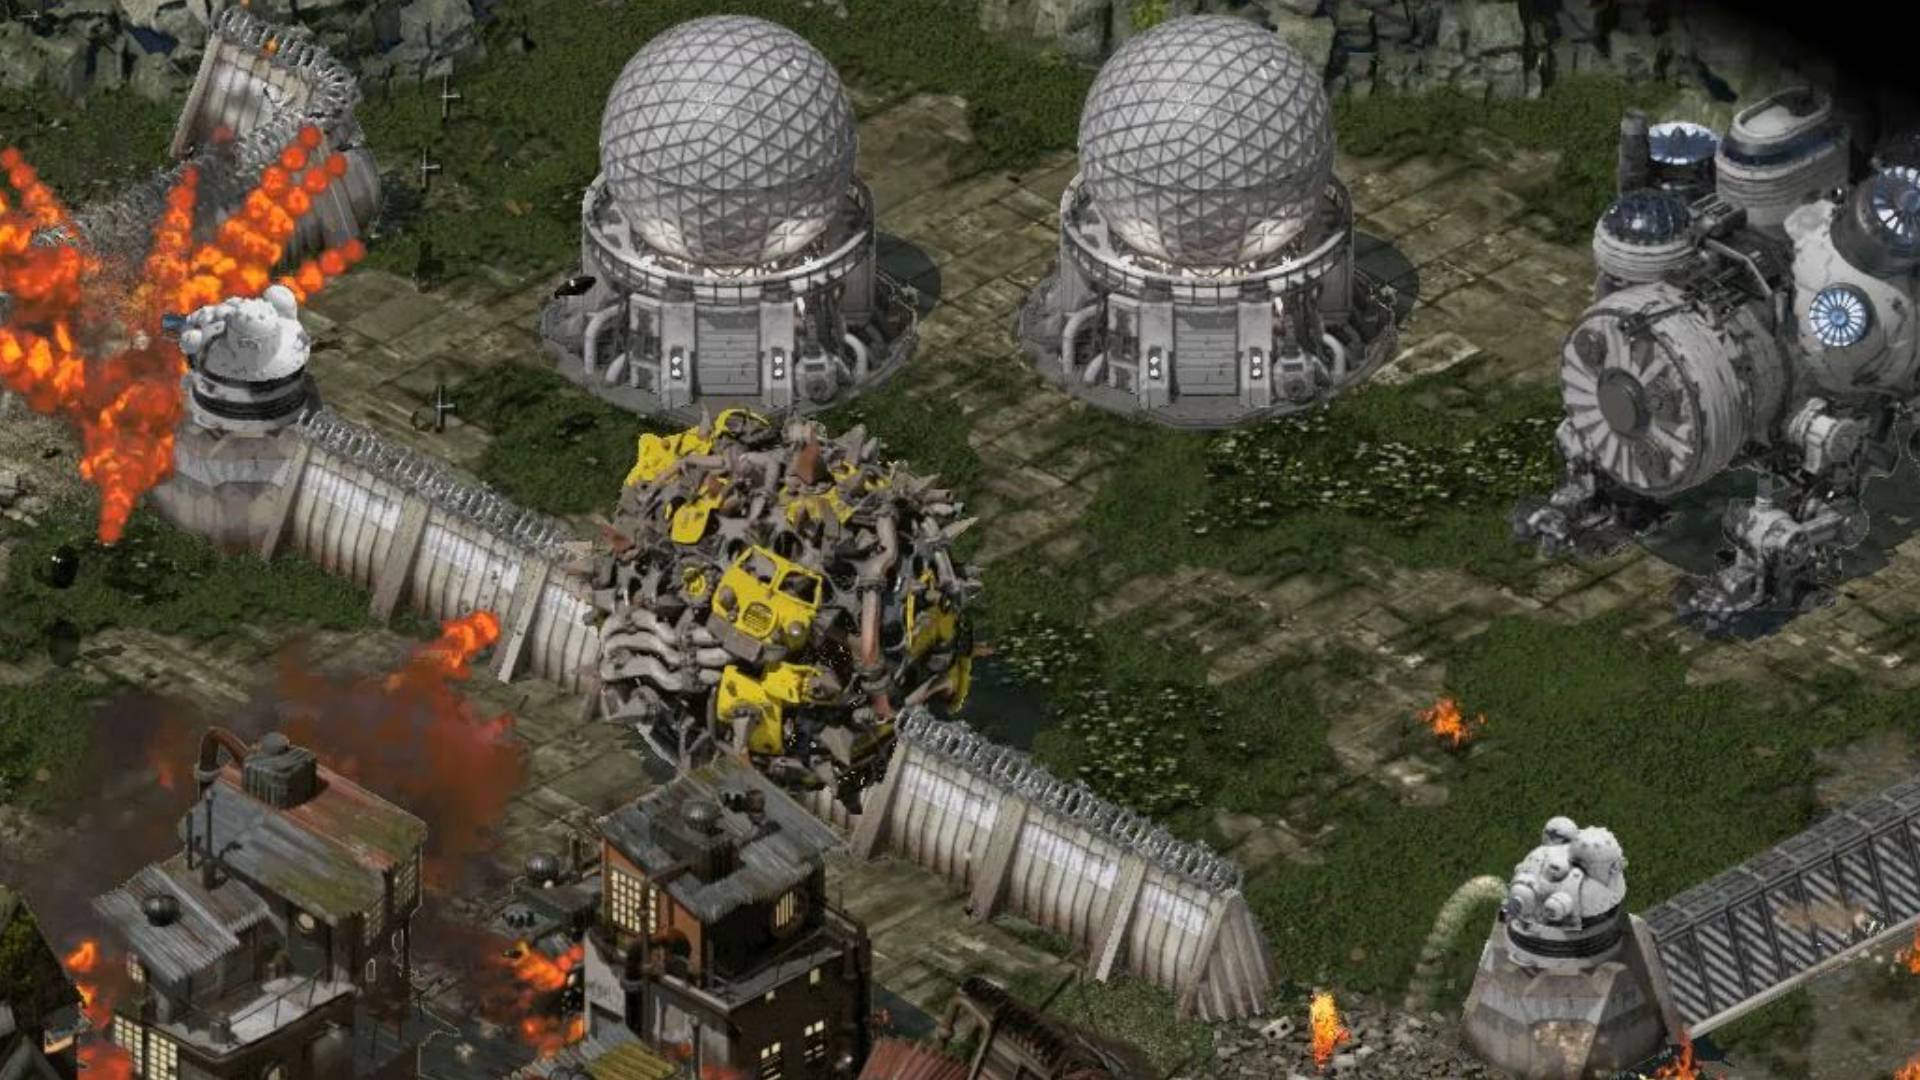 If you enjoyed the Command and Conquer games growing up, this is